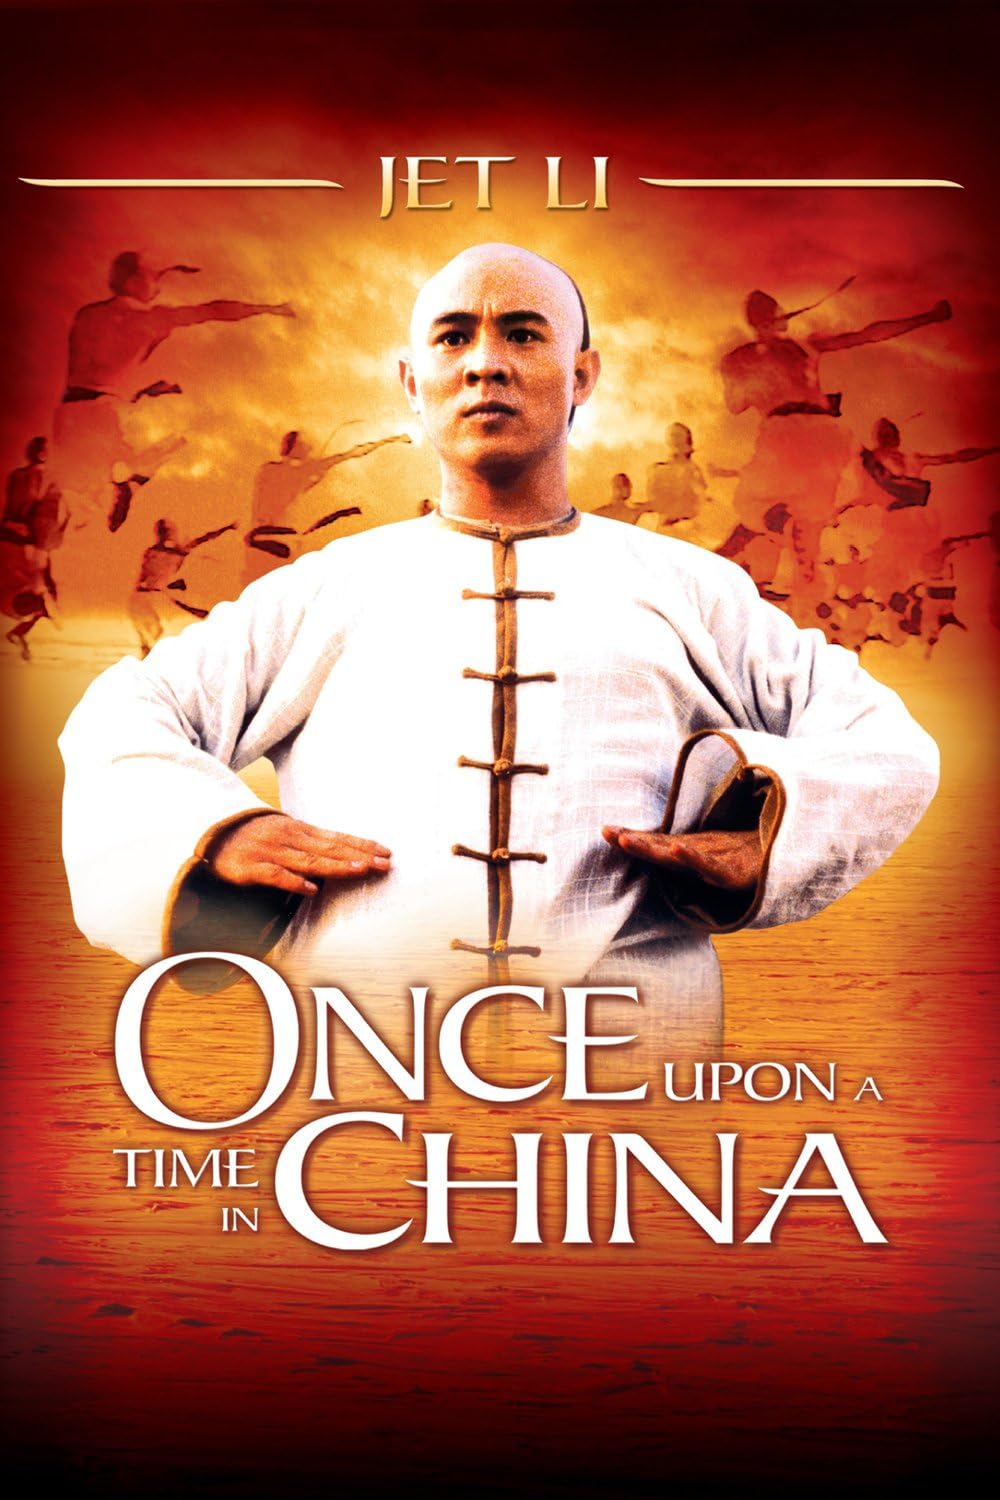 FULL MOVIE: Once Upon A Time In China (1991)